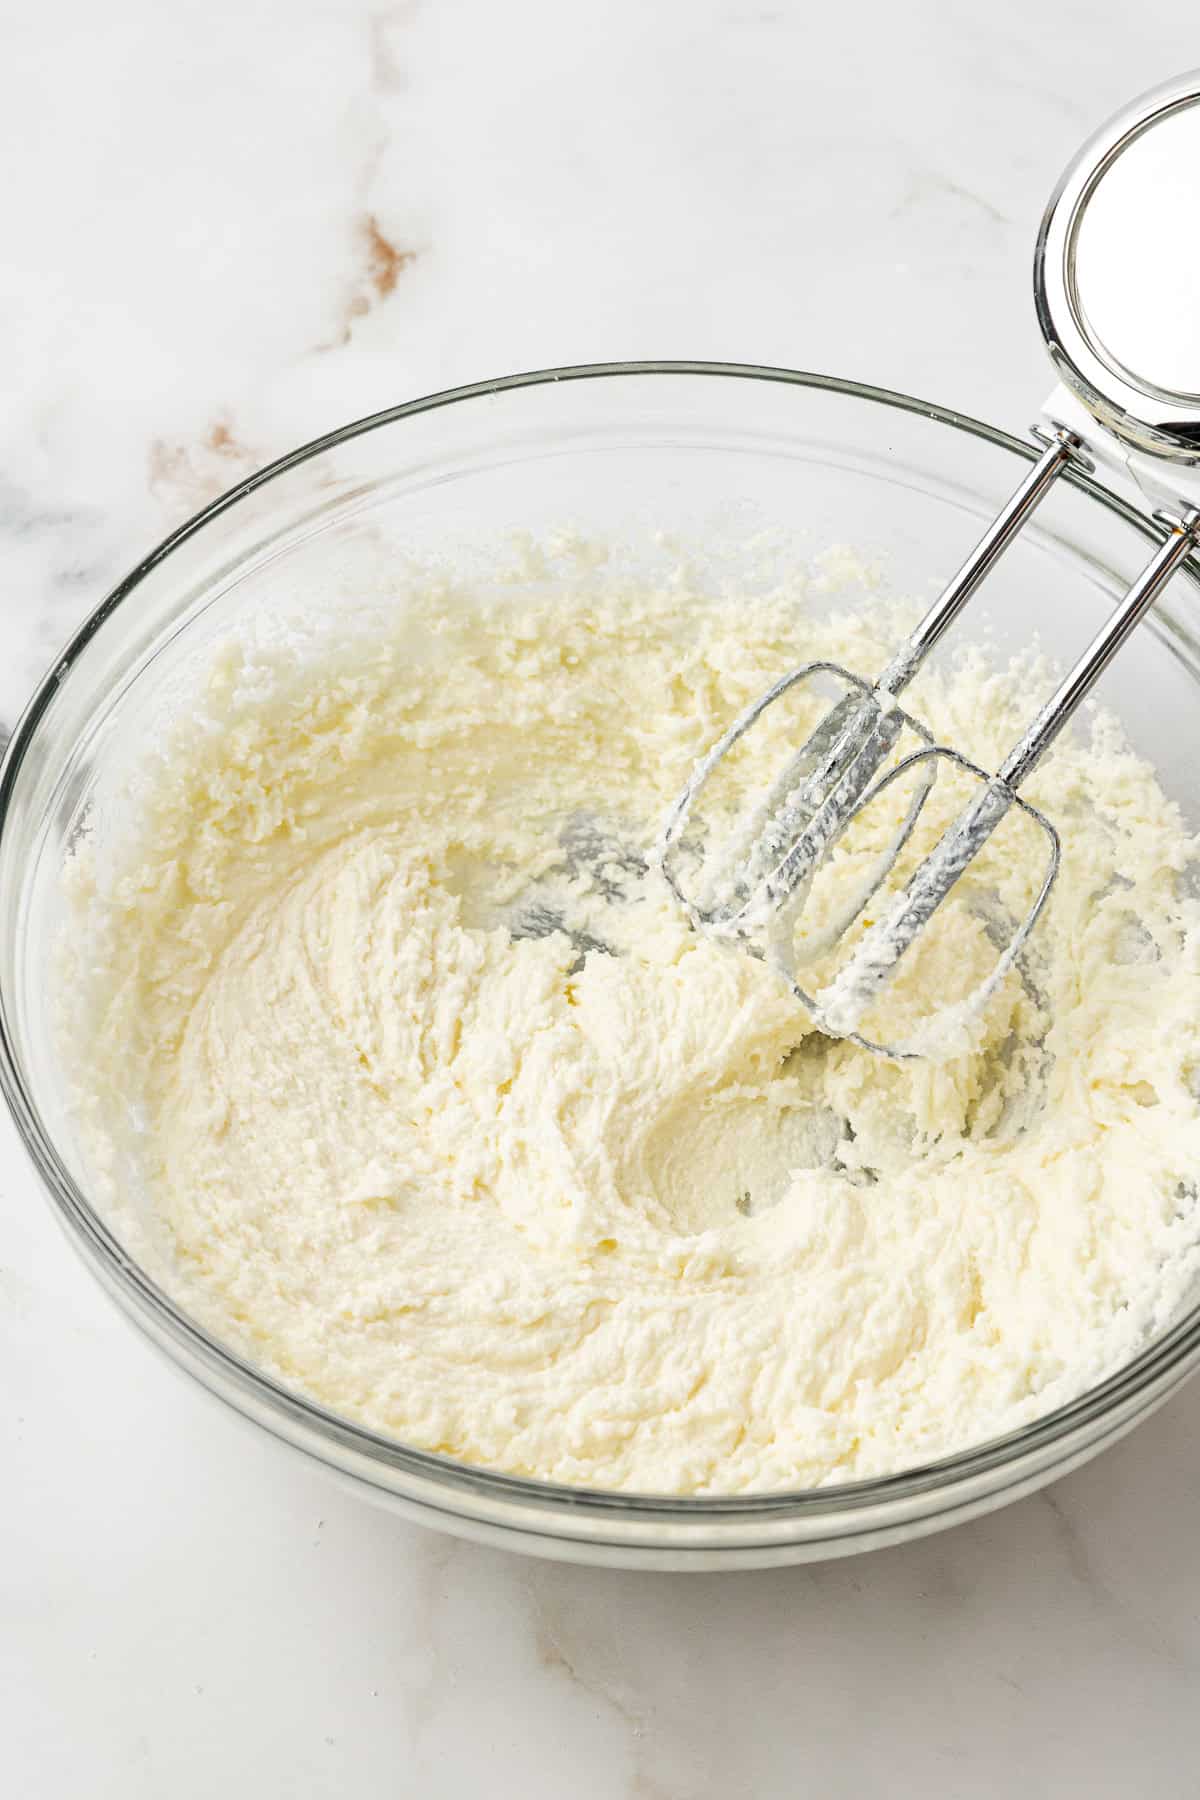 butter, sugar and oil whisked together in a clear glass bowl with an electric mixer leaning on the side of the bowl